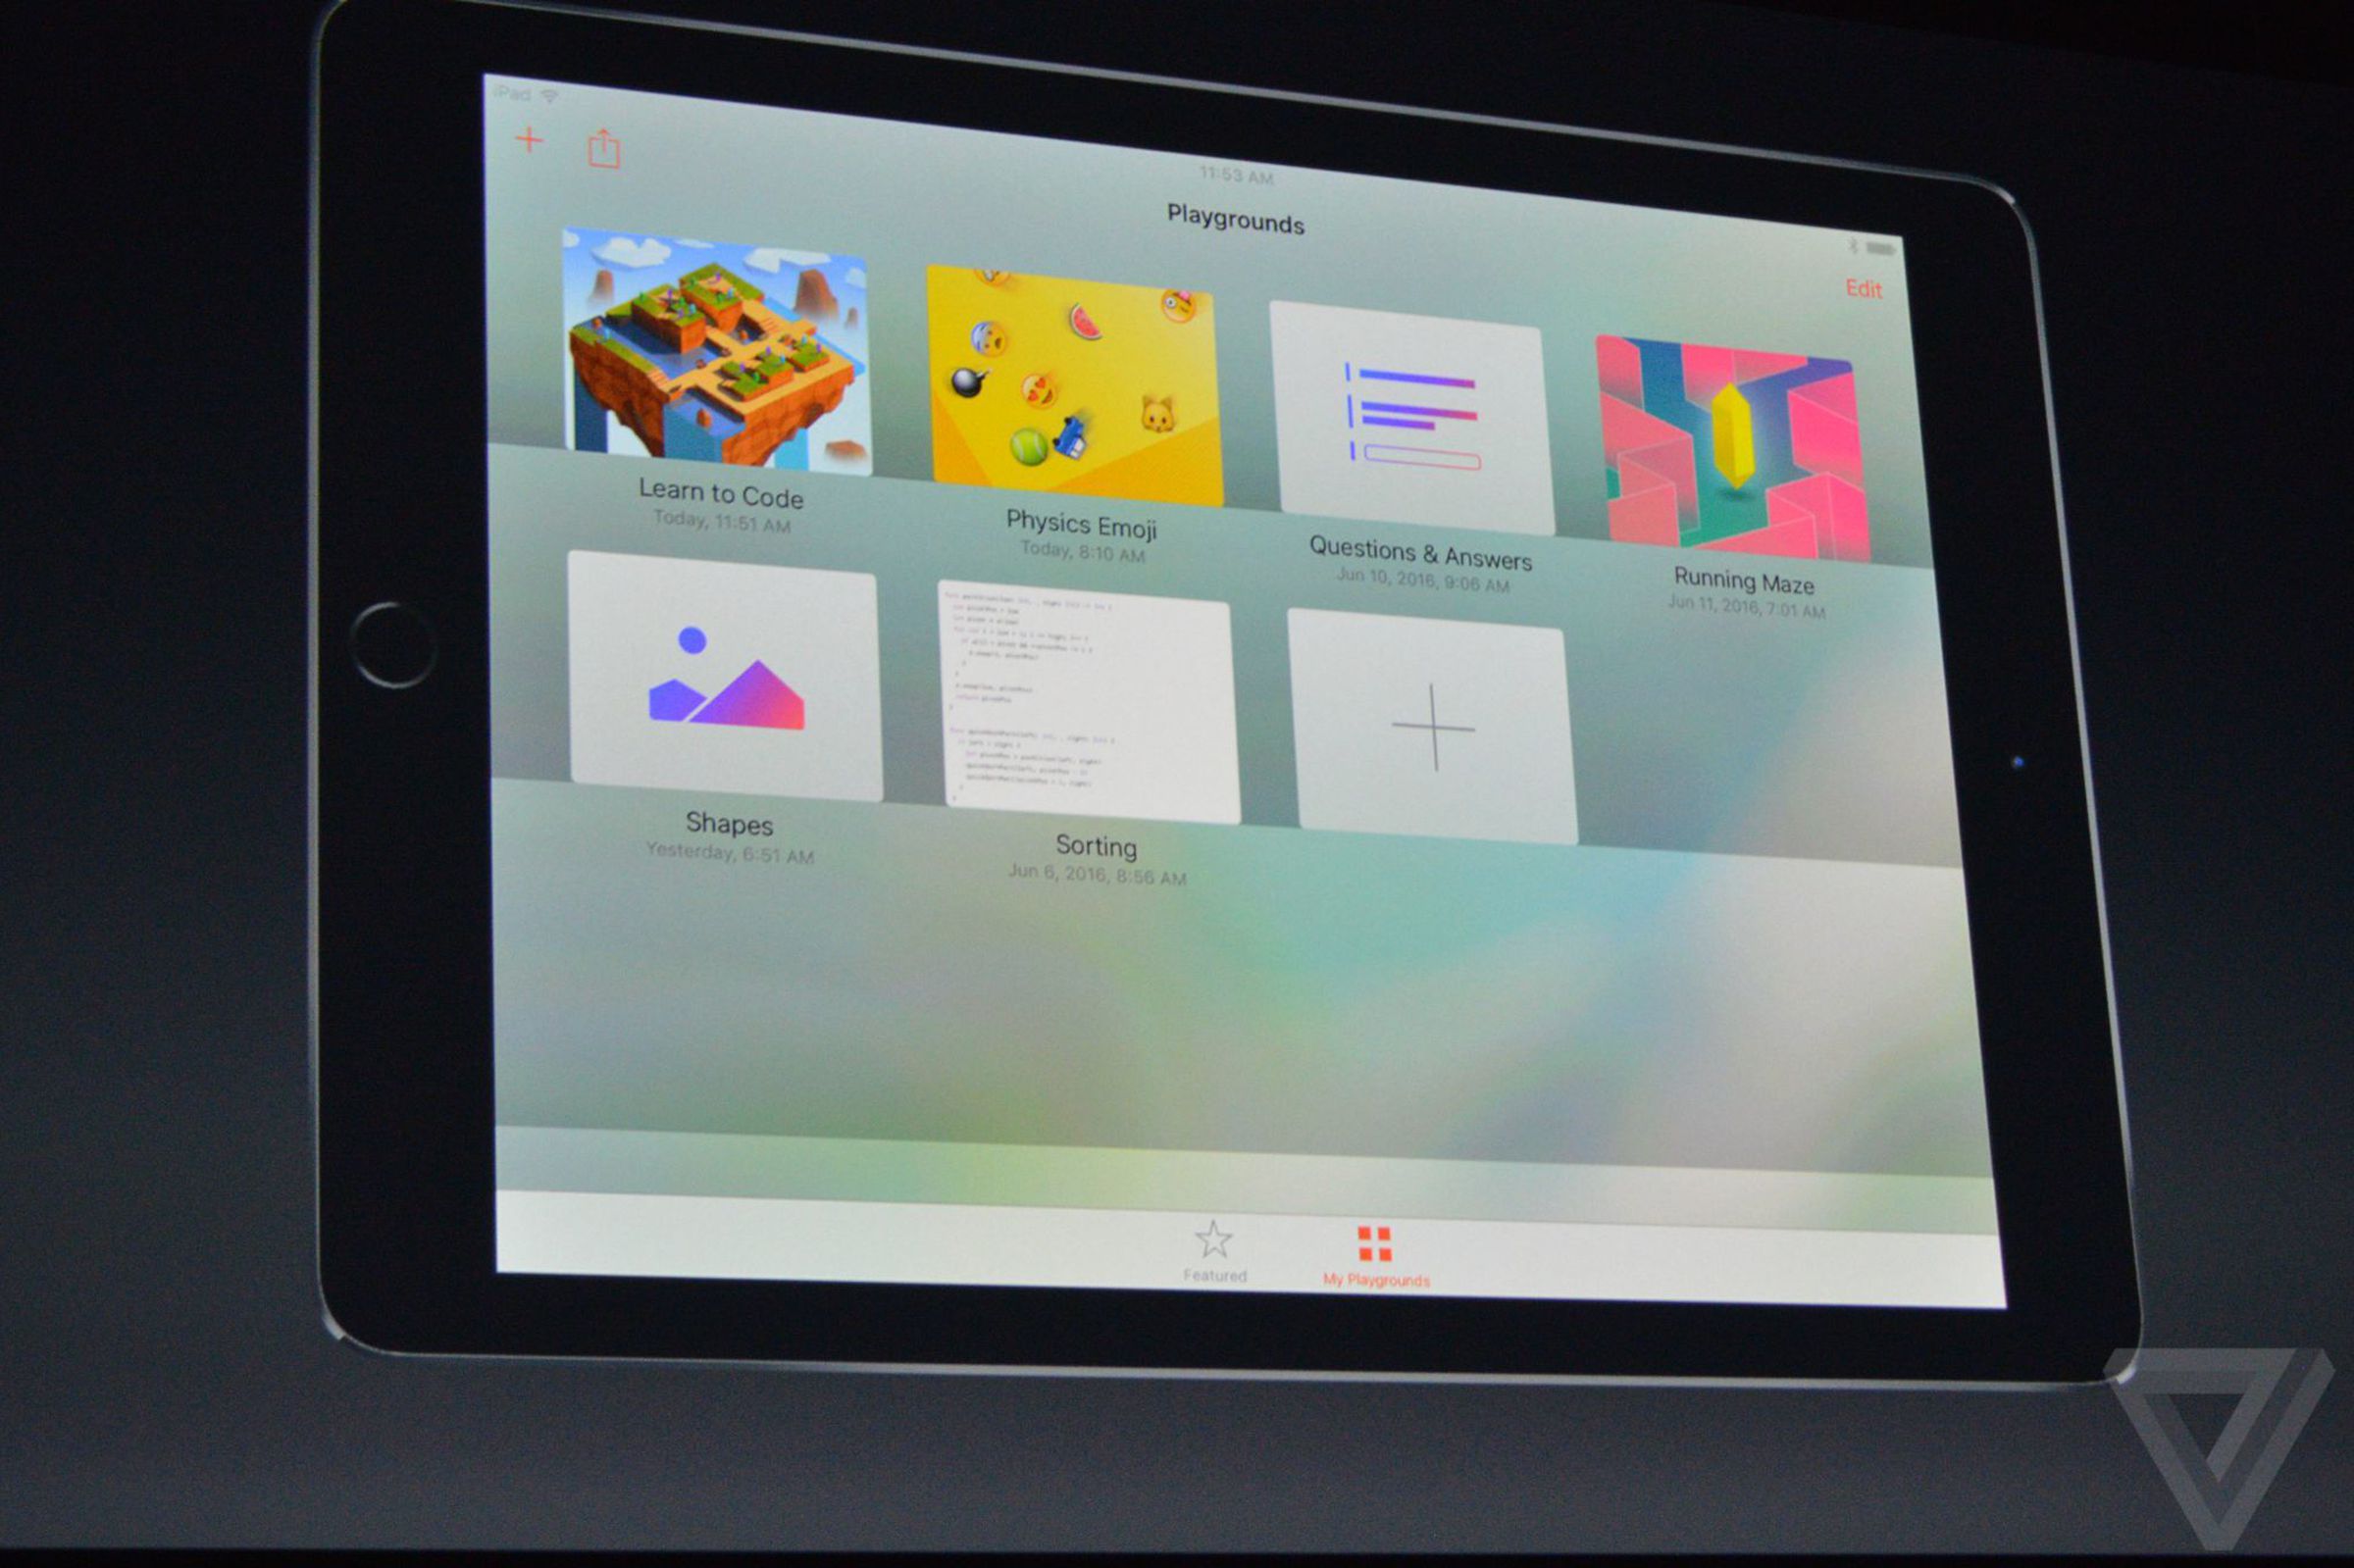 Swift Playgrounds at WWDC16 announcement photos